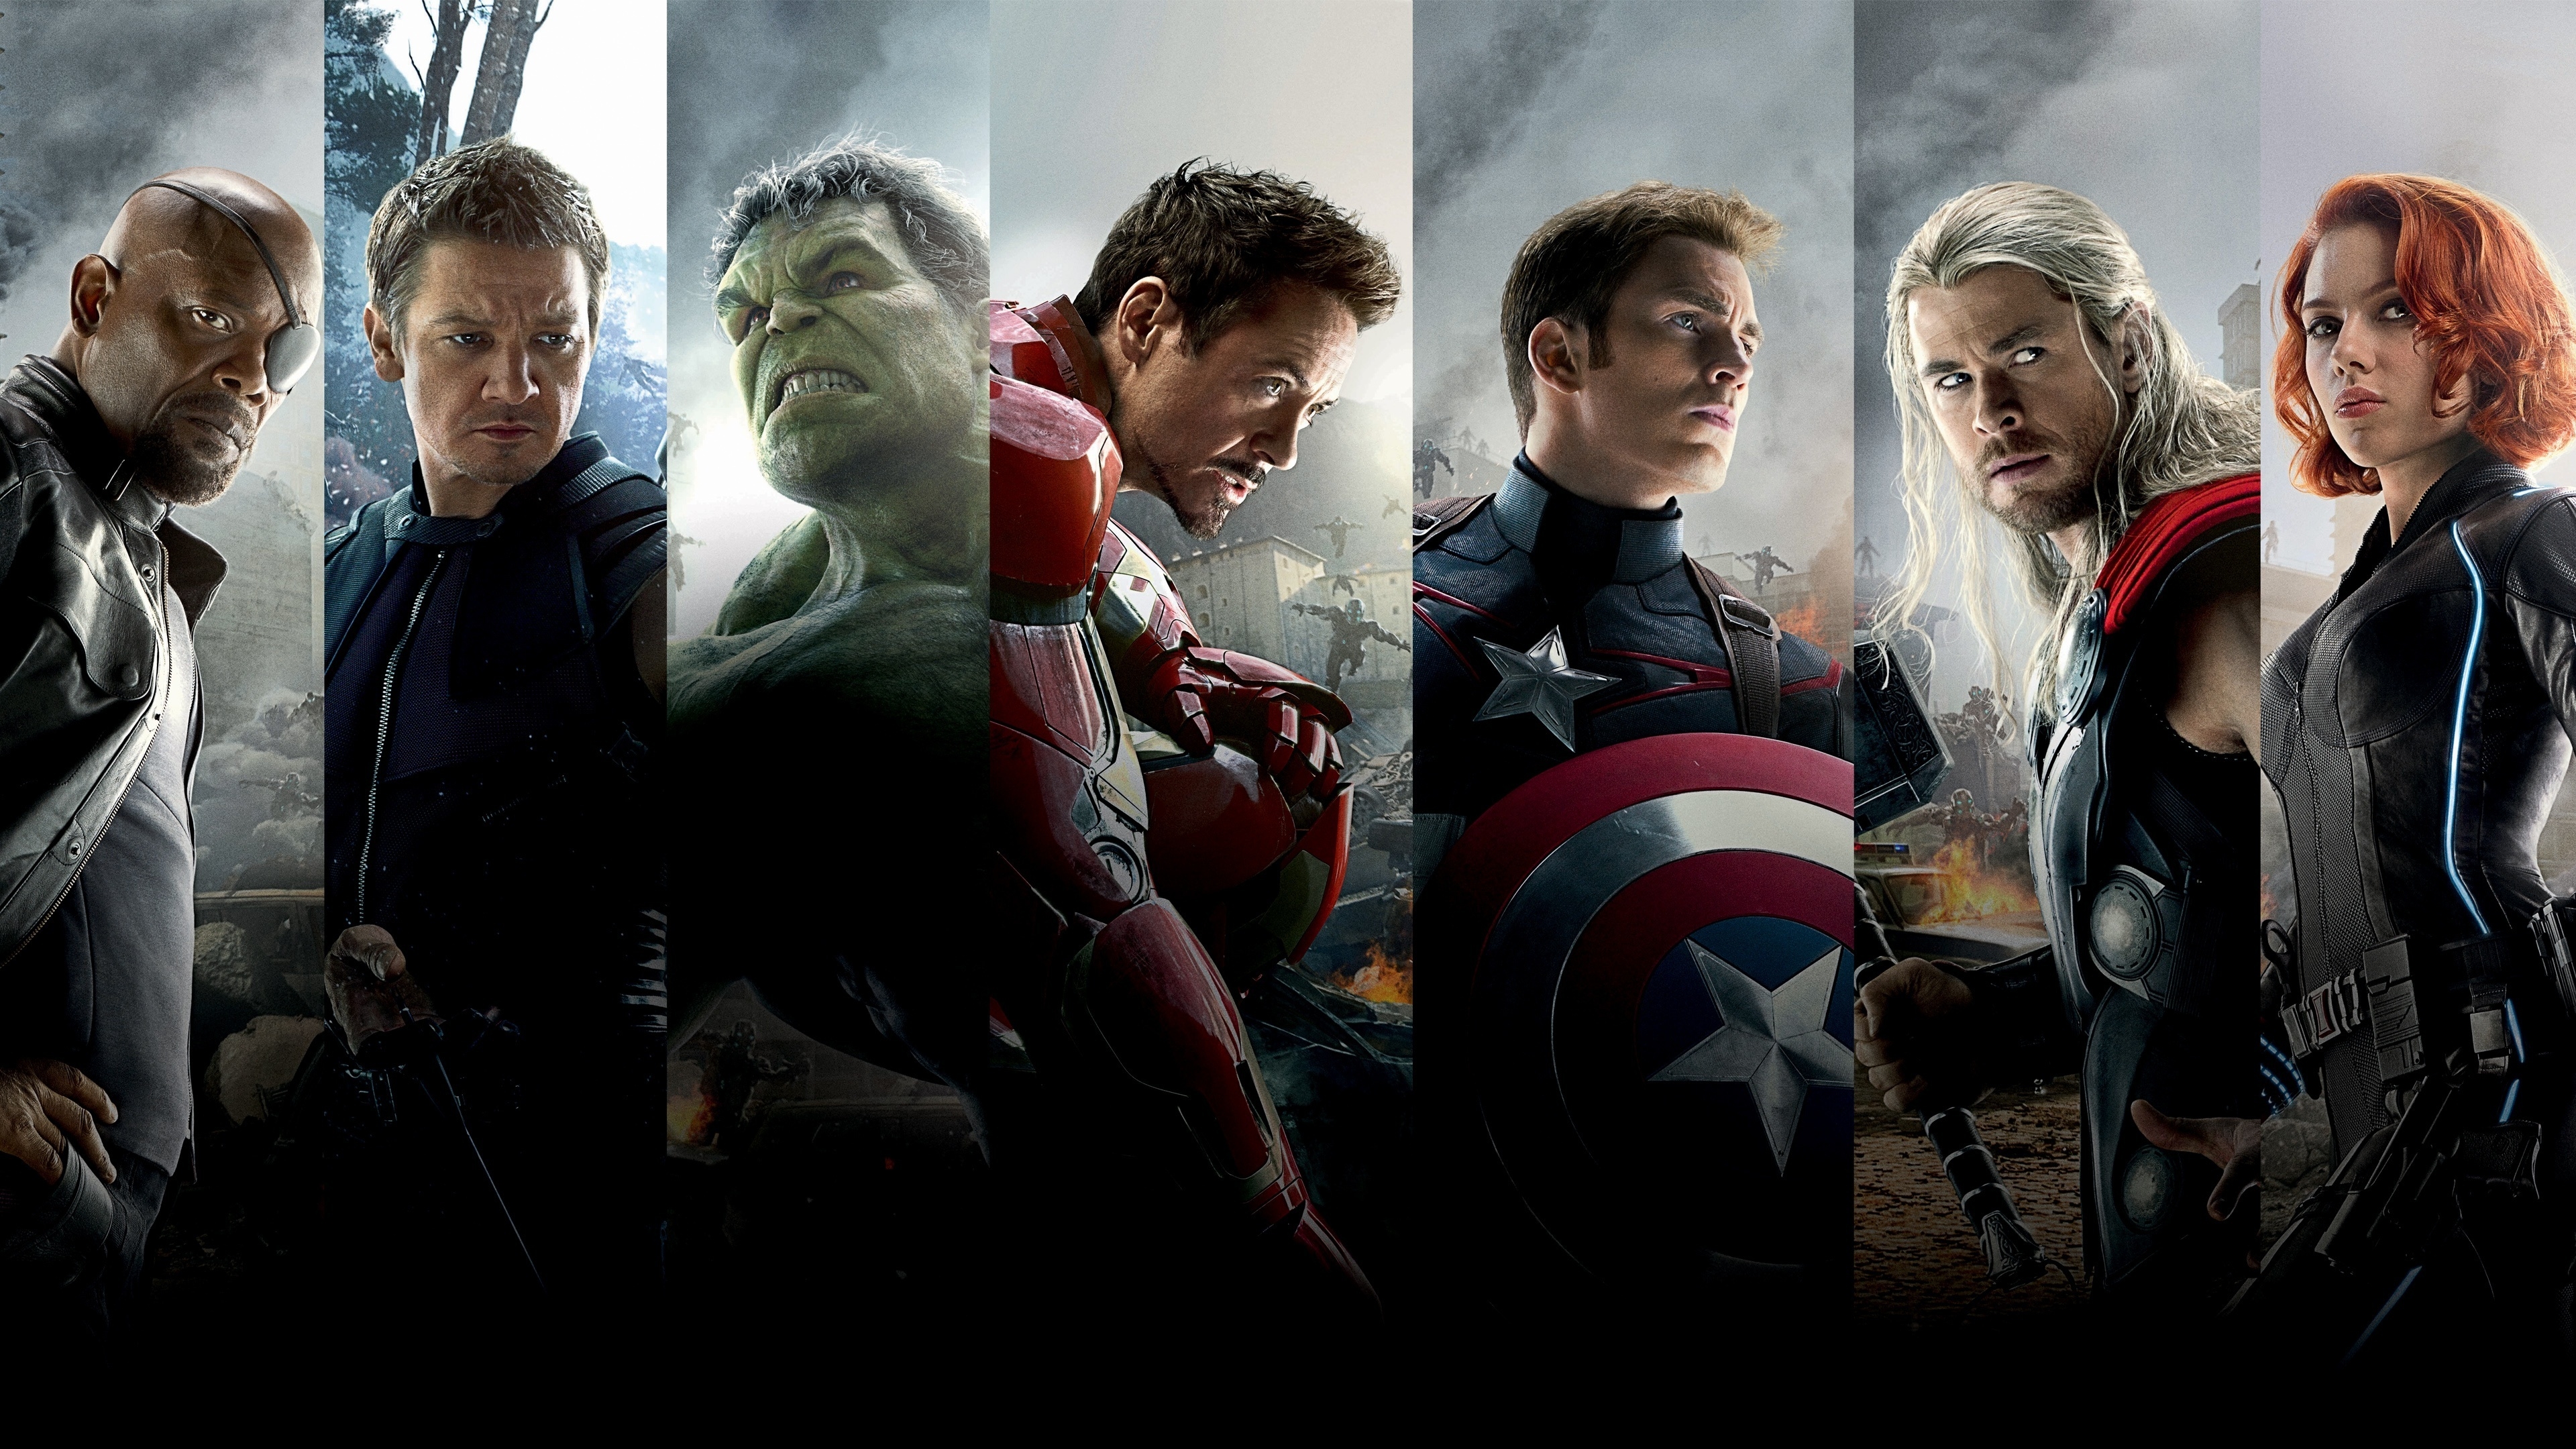 Avengers Age of Ultron for 3840 x 2160 Ultra HD resolution